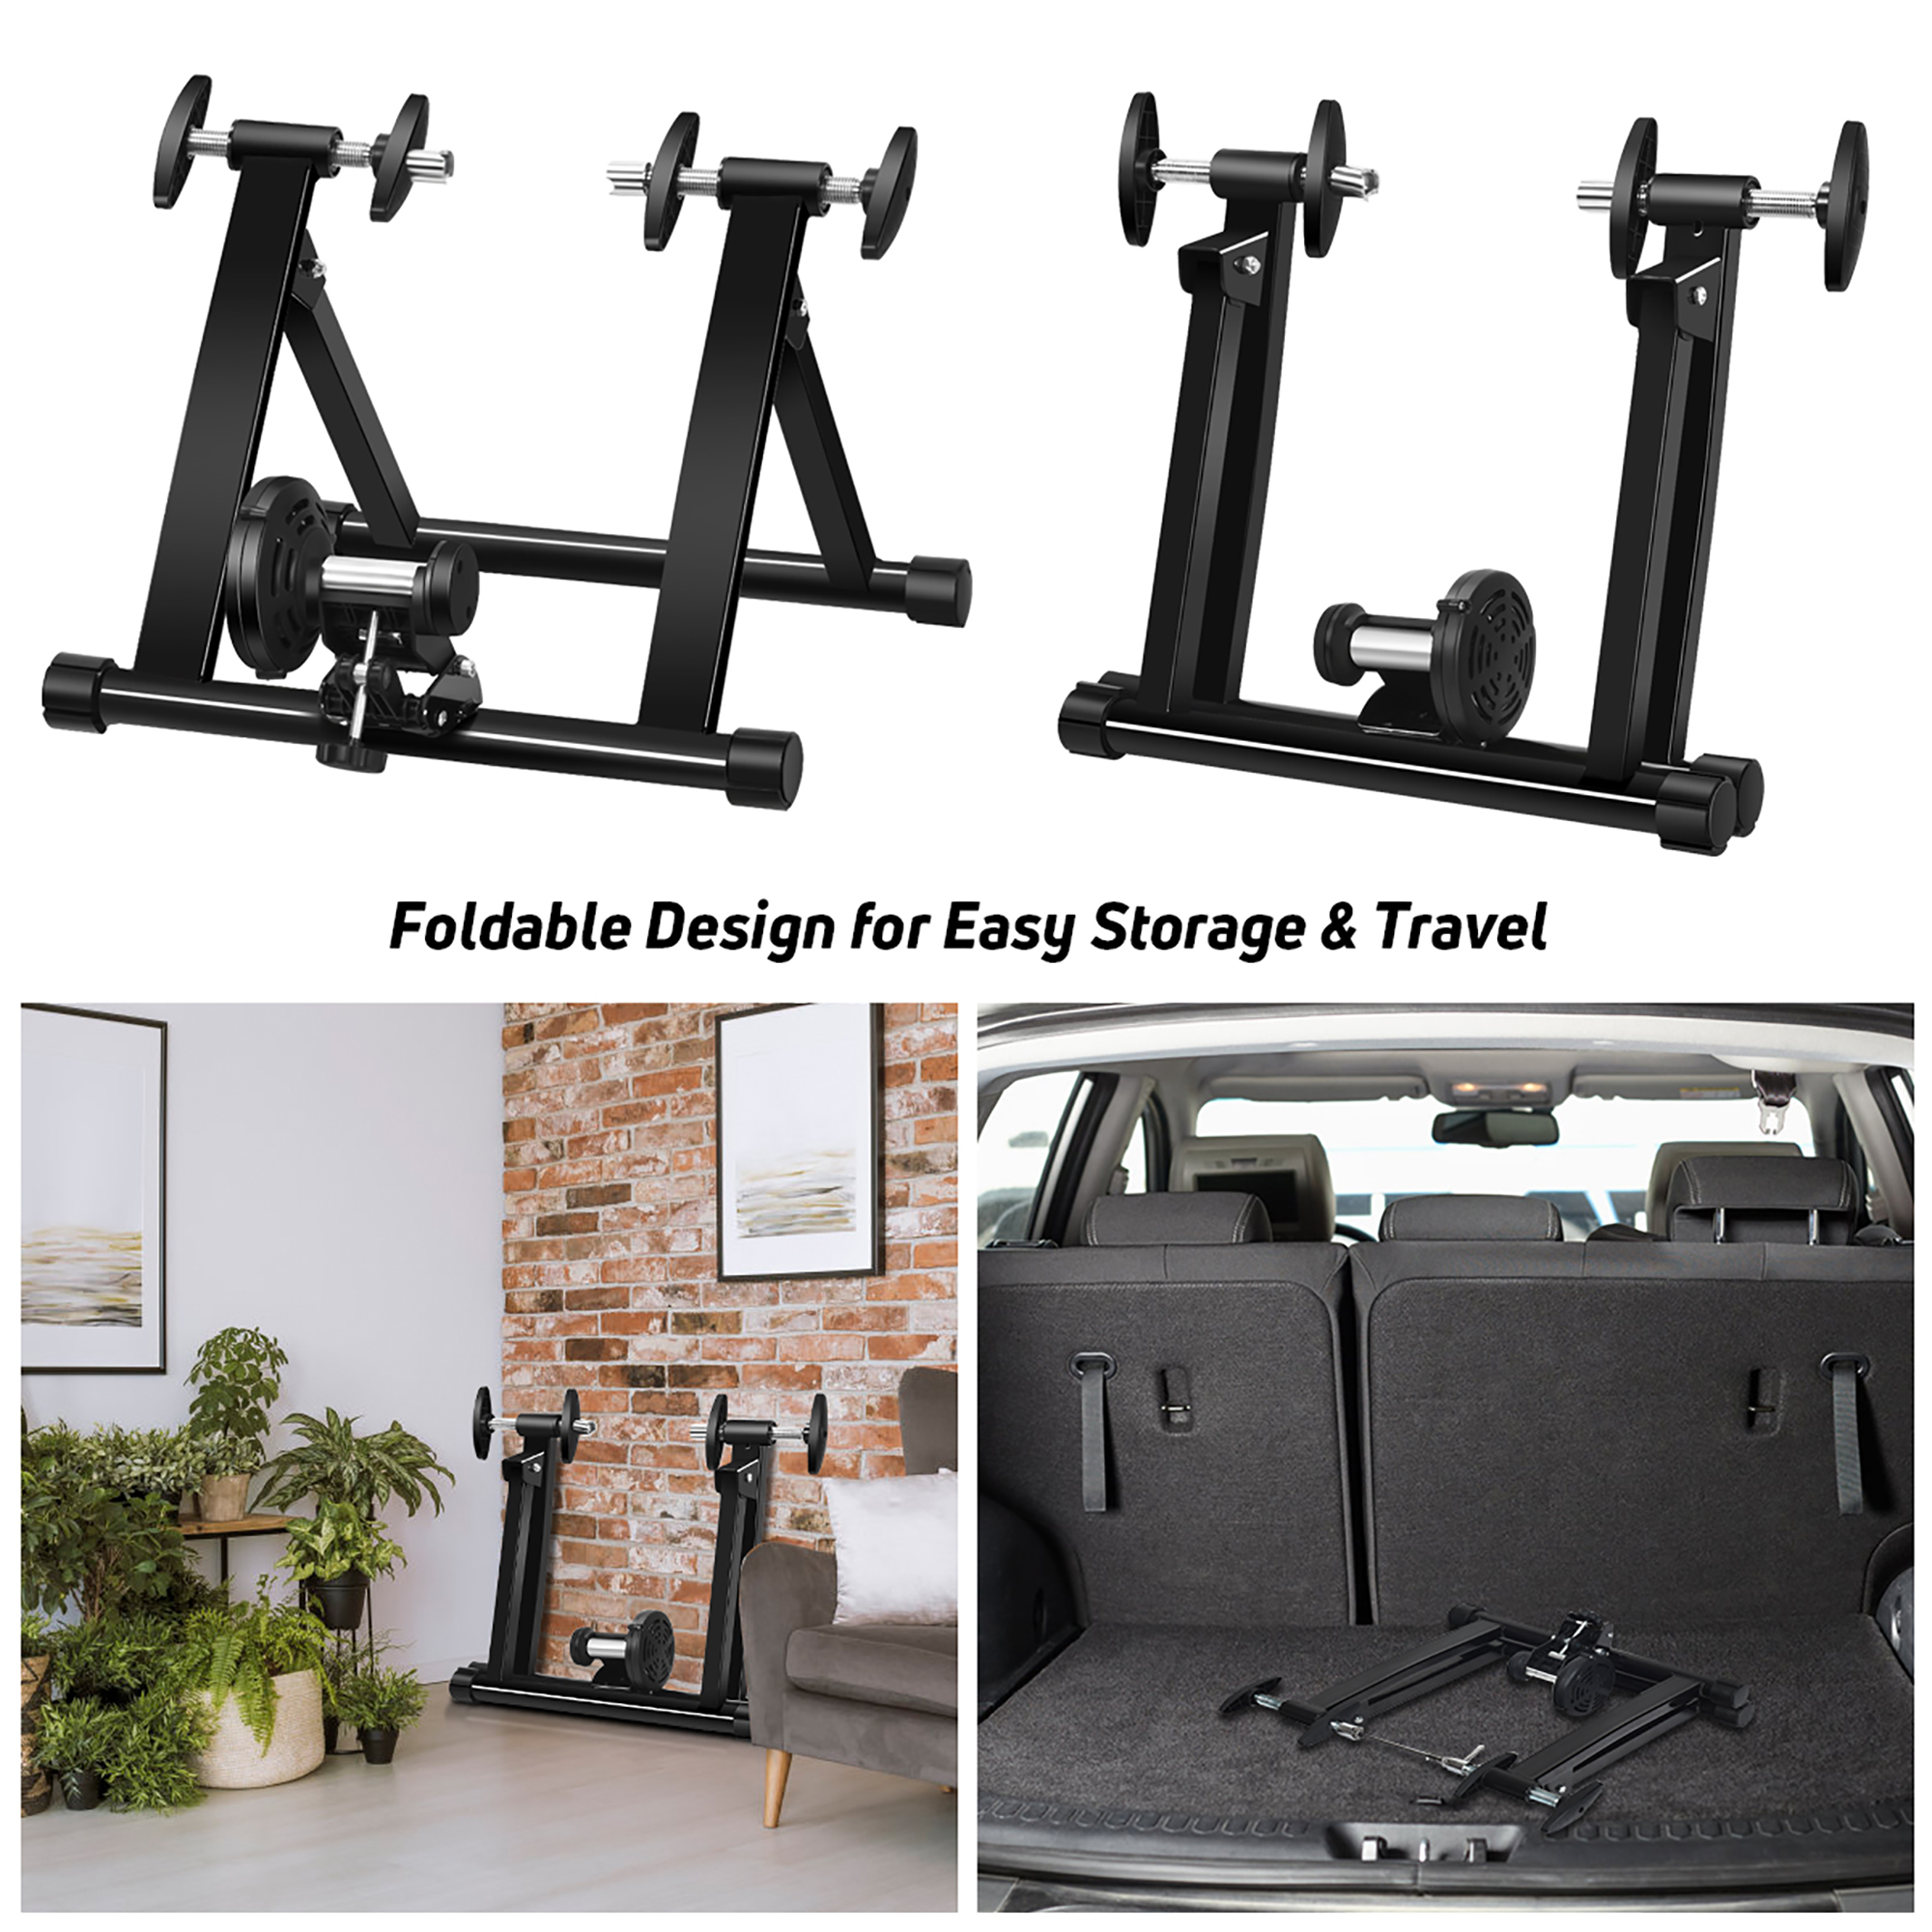 Costway Bike Trainer Folding Bicycle Indoor Exercise Training Stand